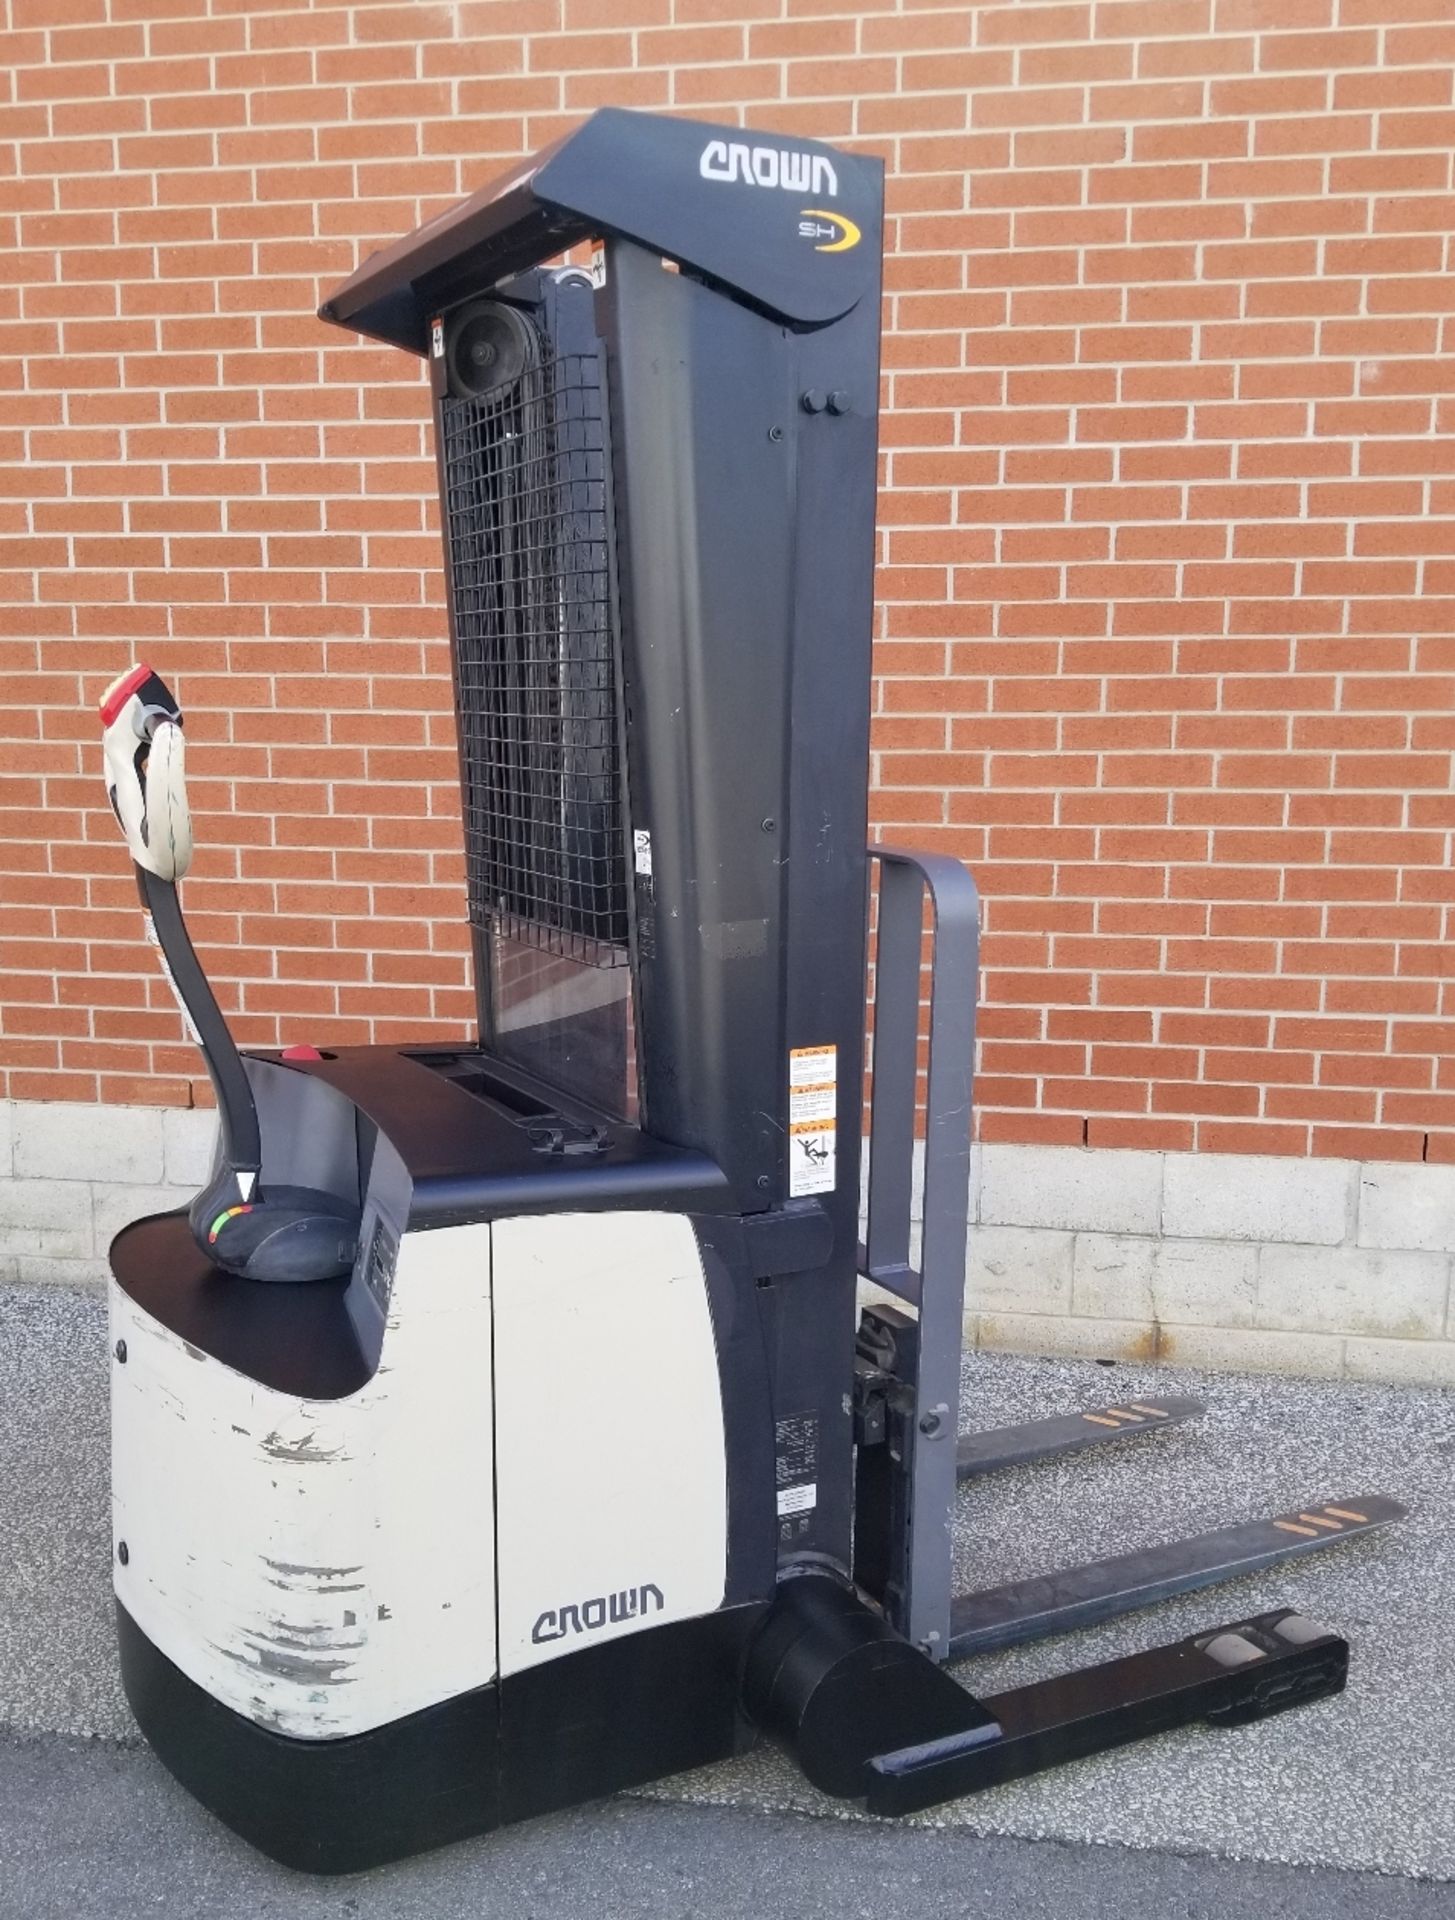 CROWN (2012) SH5520-40 3700 LB. CAPACITY 24V WALK-BEHIND ELECTRIC STRADDLE STACKER WITH 127" MAX.